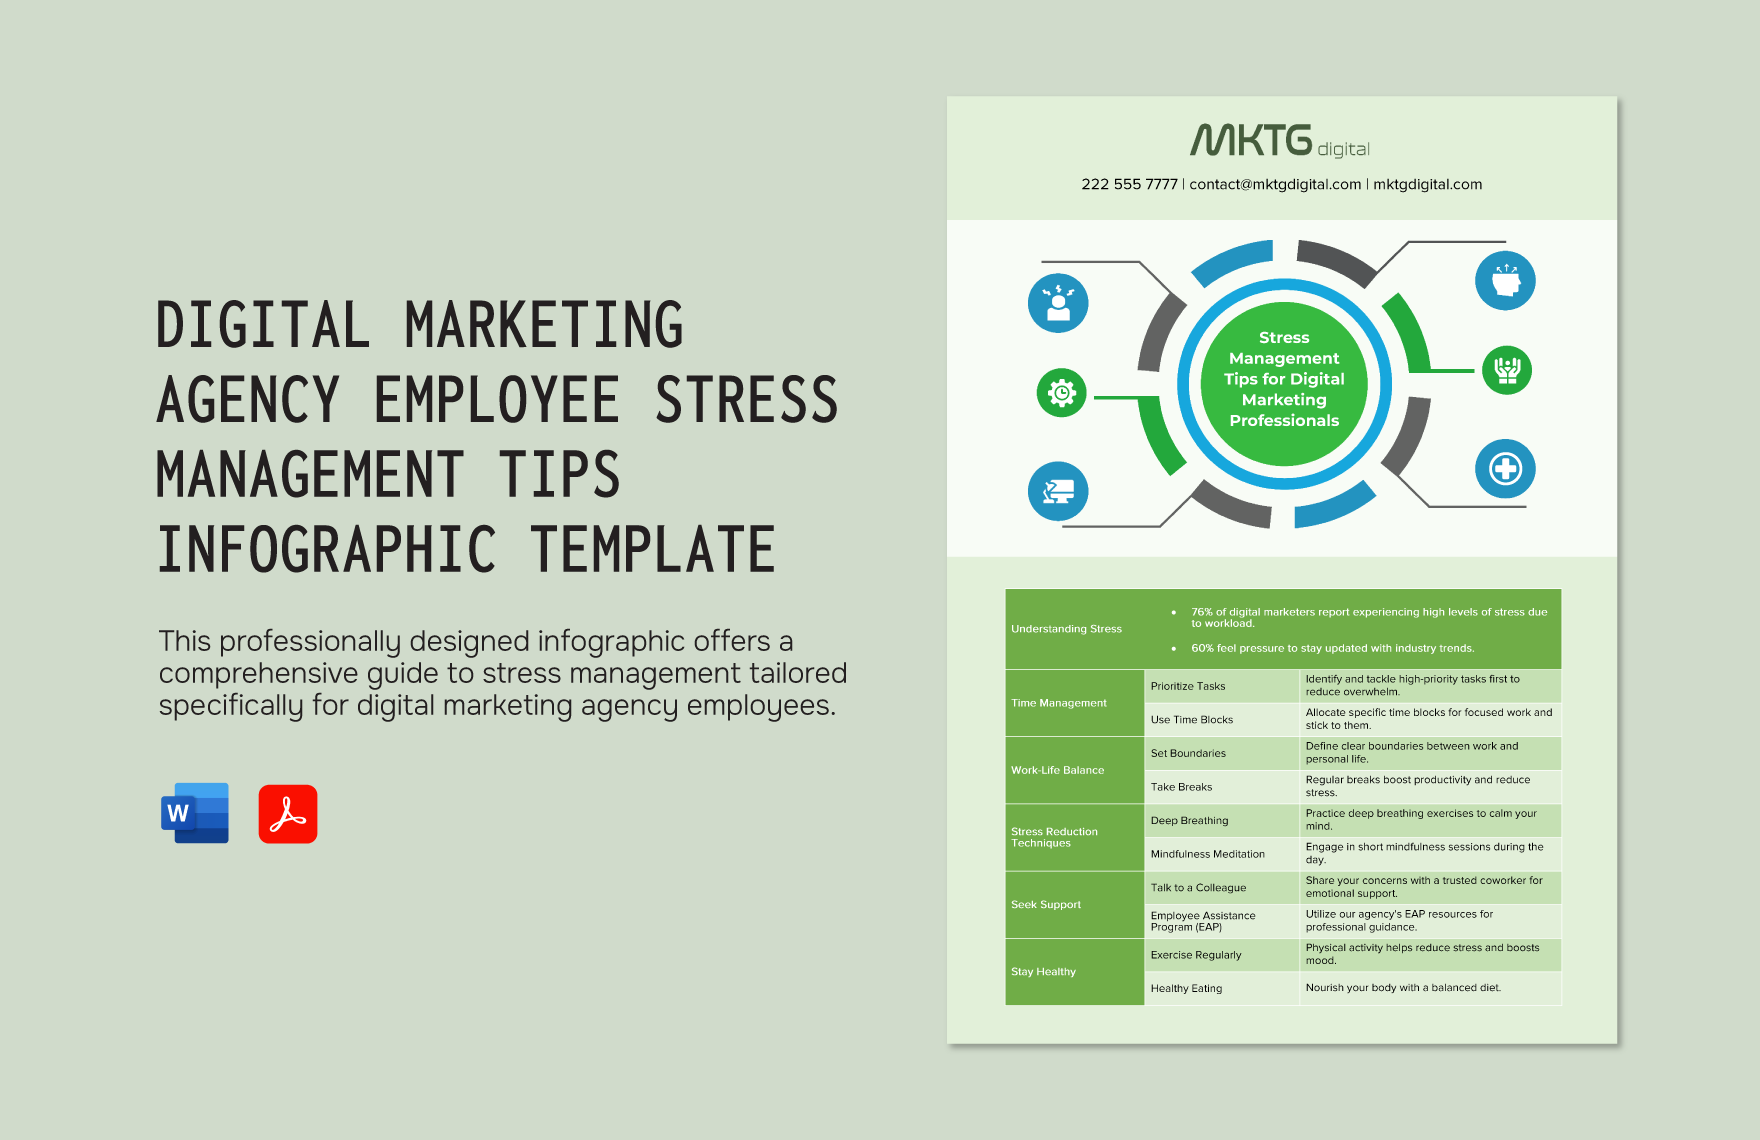 Digital Marketing Agency Employee Stress Management Tips Infographic Template